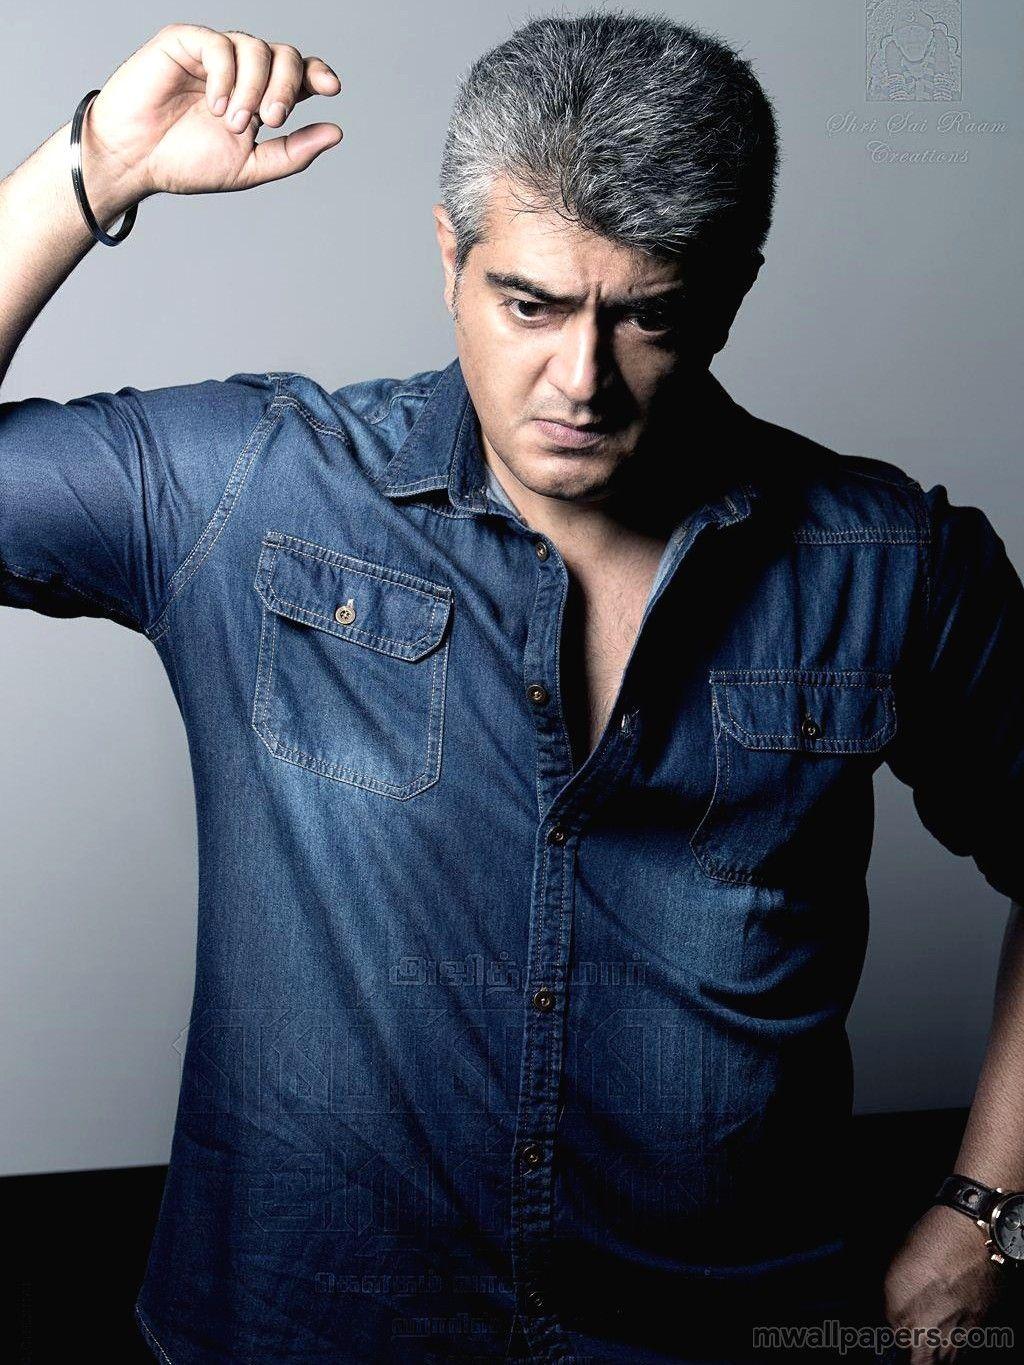 Download Ajith HD Image in 1080p HD quality to use as your